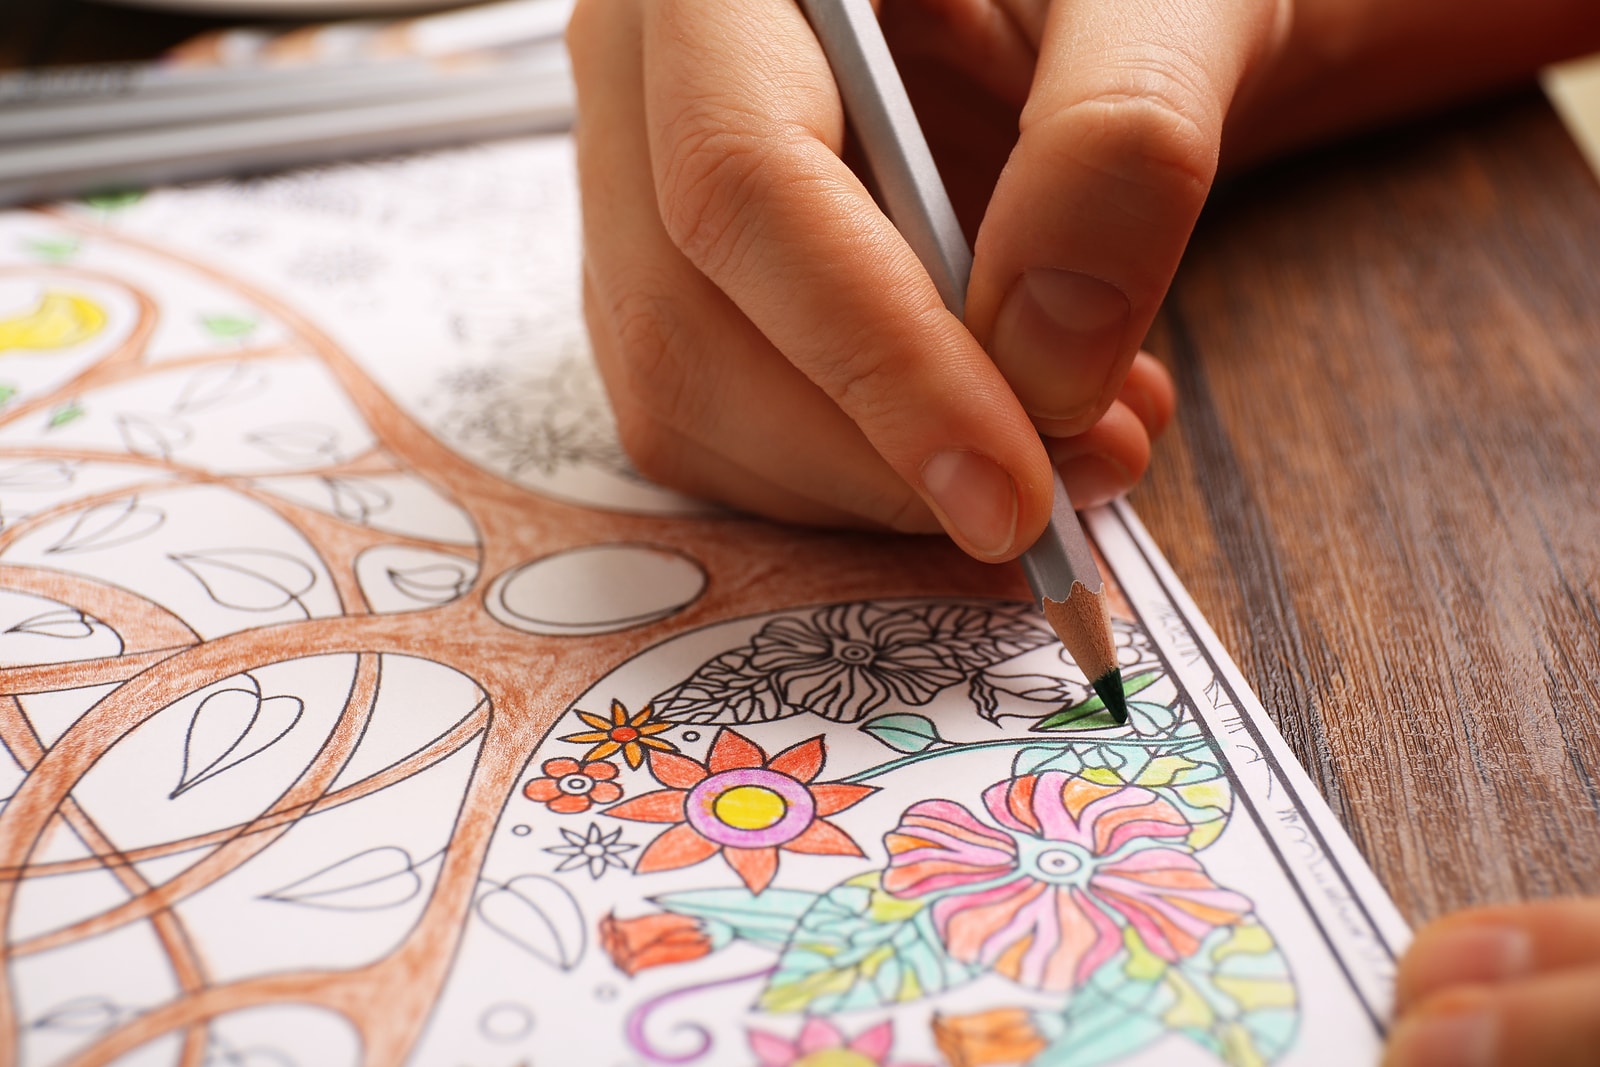 Adult Coloring Books Good For Mental Health